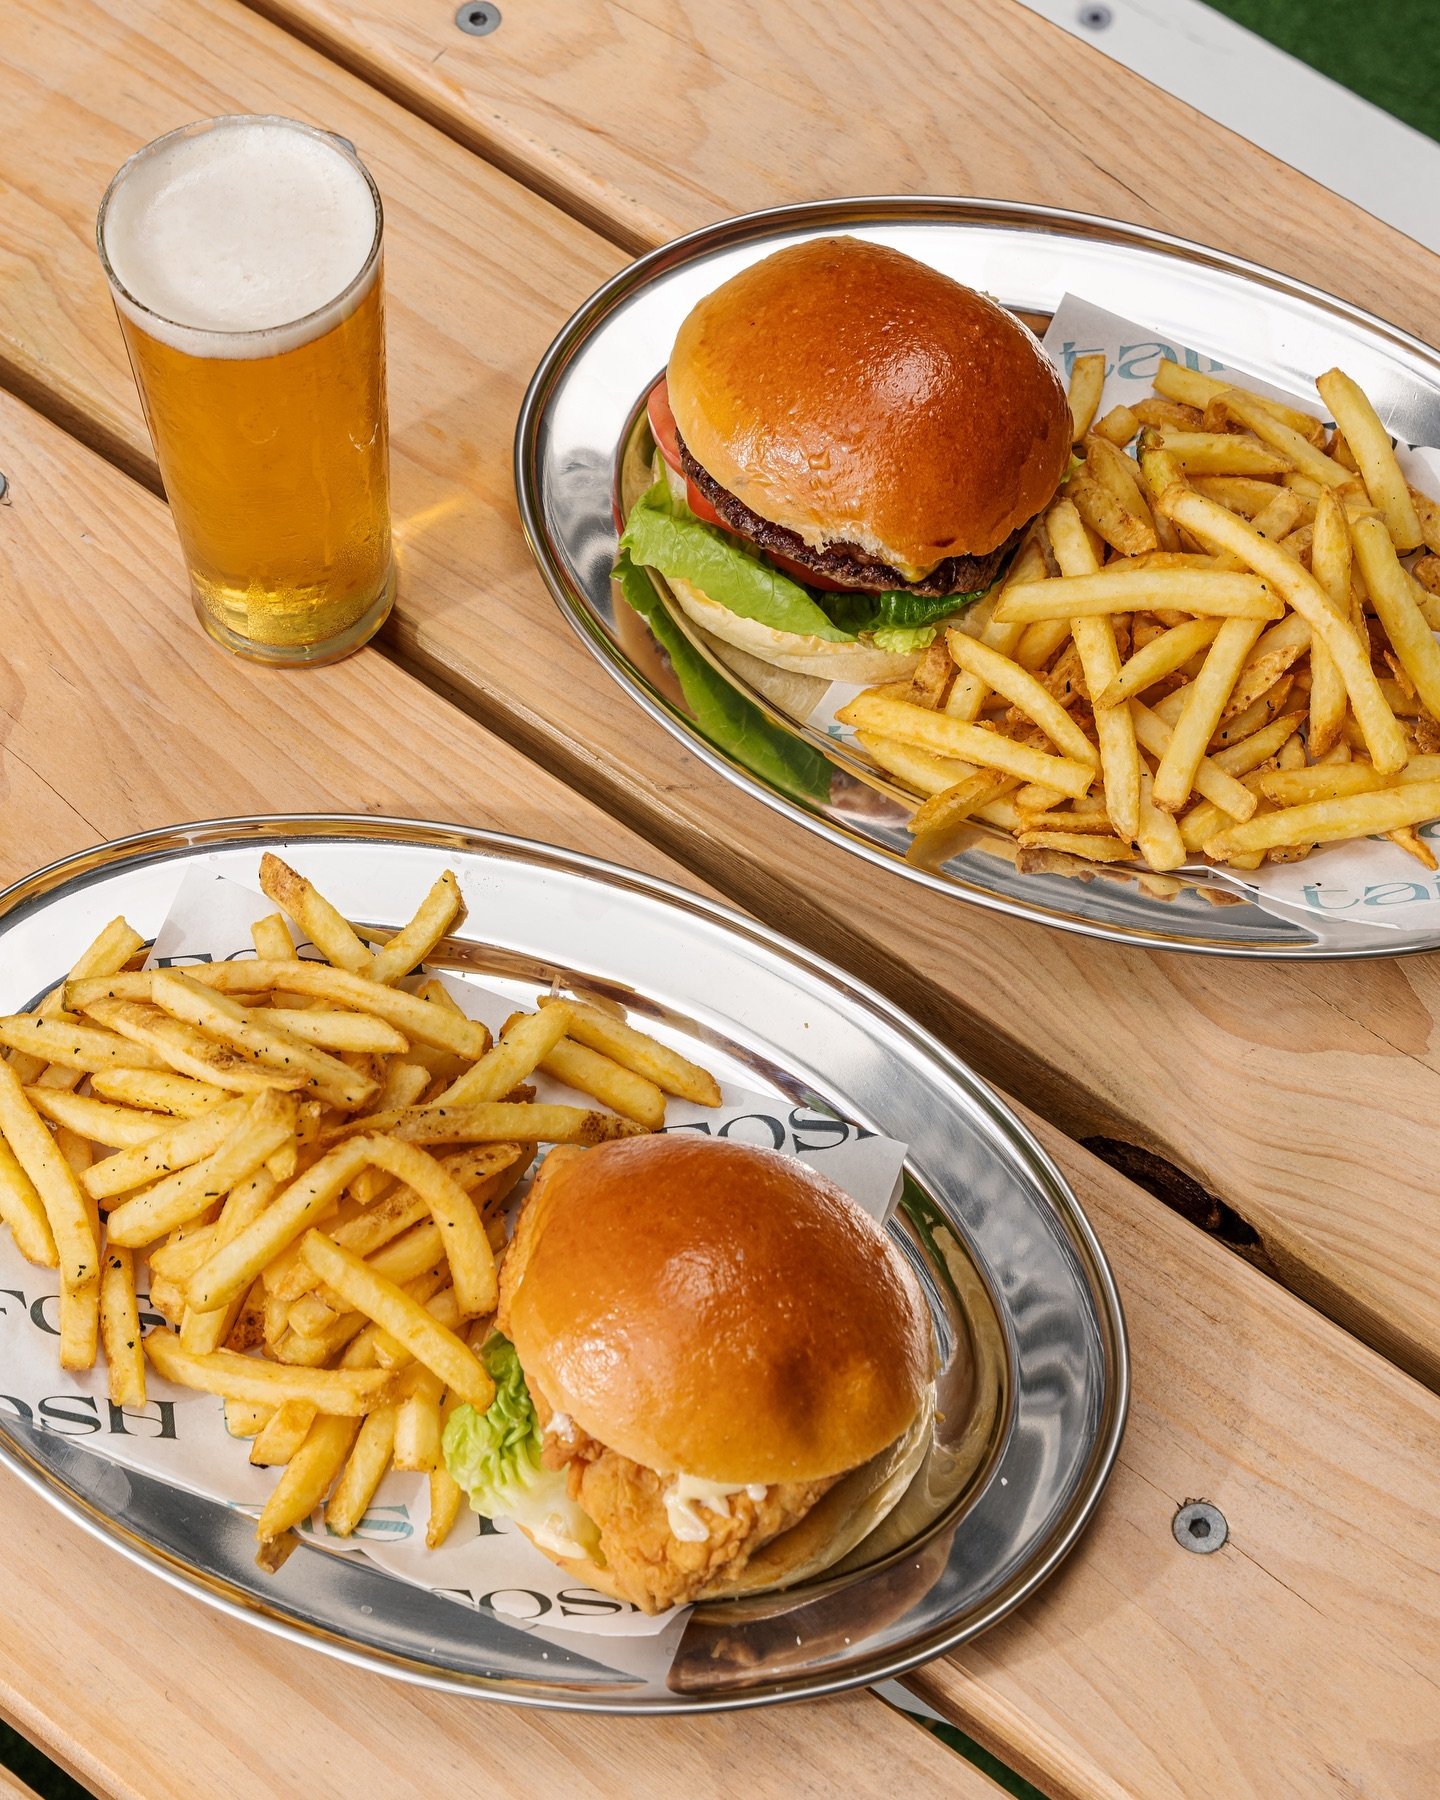 Join us at Fosh Tails next door, for some fantastic daily deals like your choice of burger and a schooner of beer for $22 every Wednesday. 

Deals available Monday - Thursday

www.foshportside.com.au/catch-of-the-day to view the menu or call us on (0